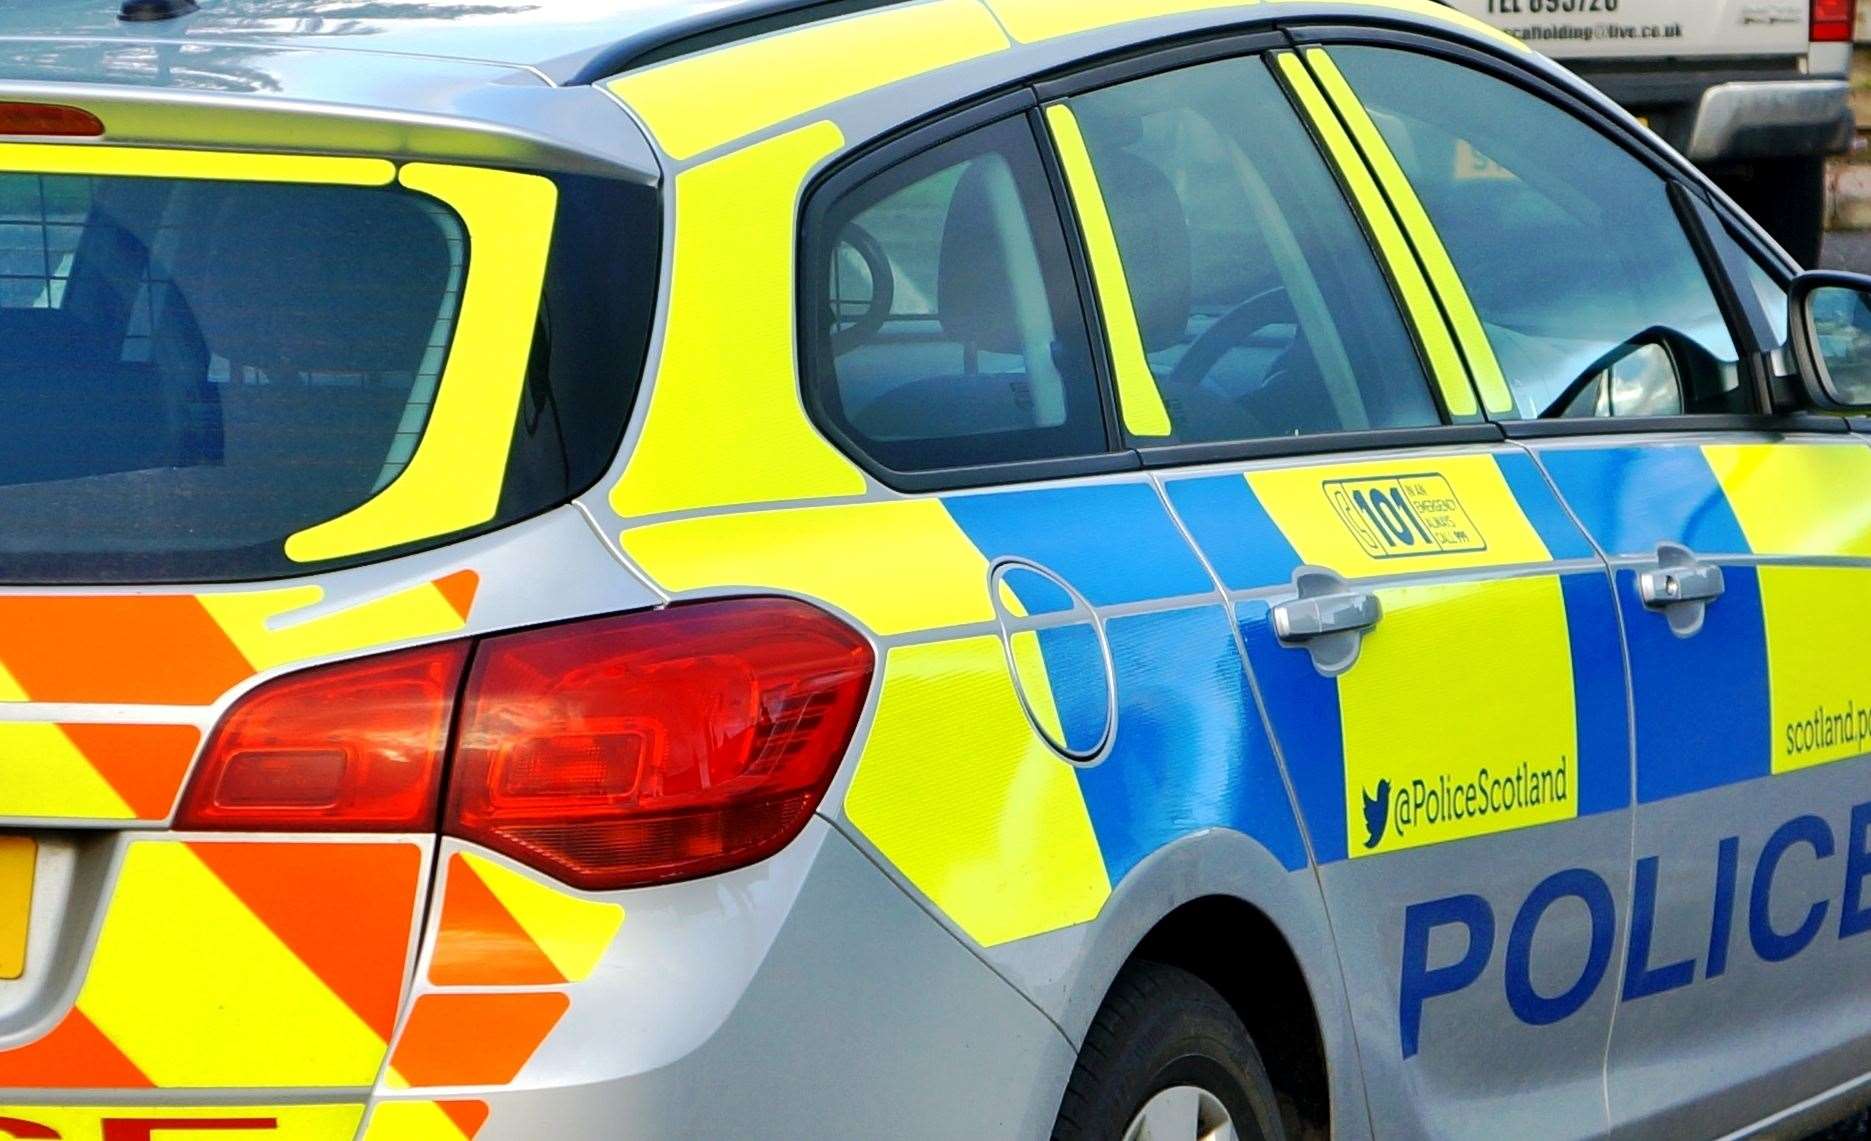 Police are appealing for information after a serious crash in the Glen Shiel area last night.